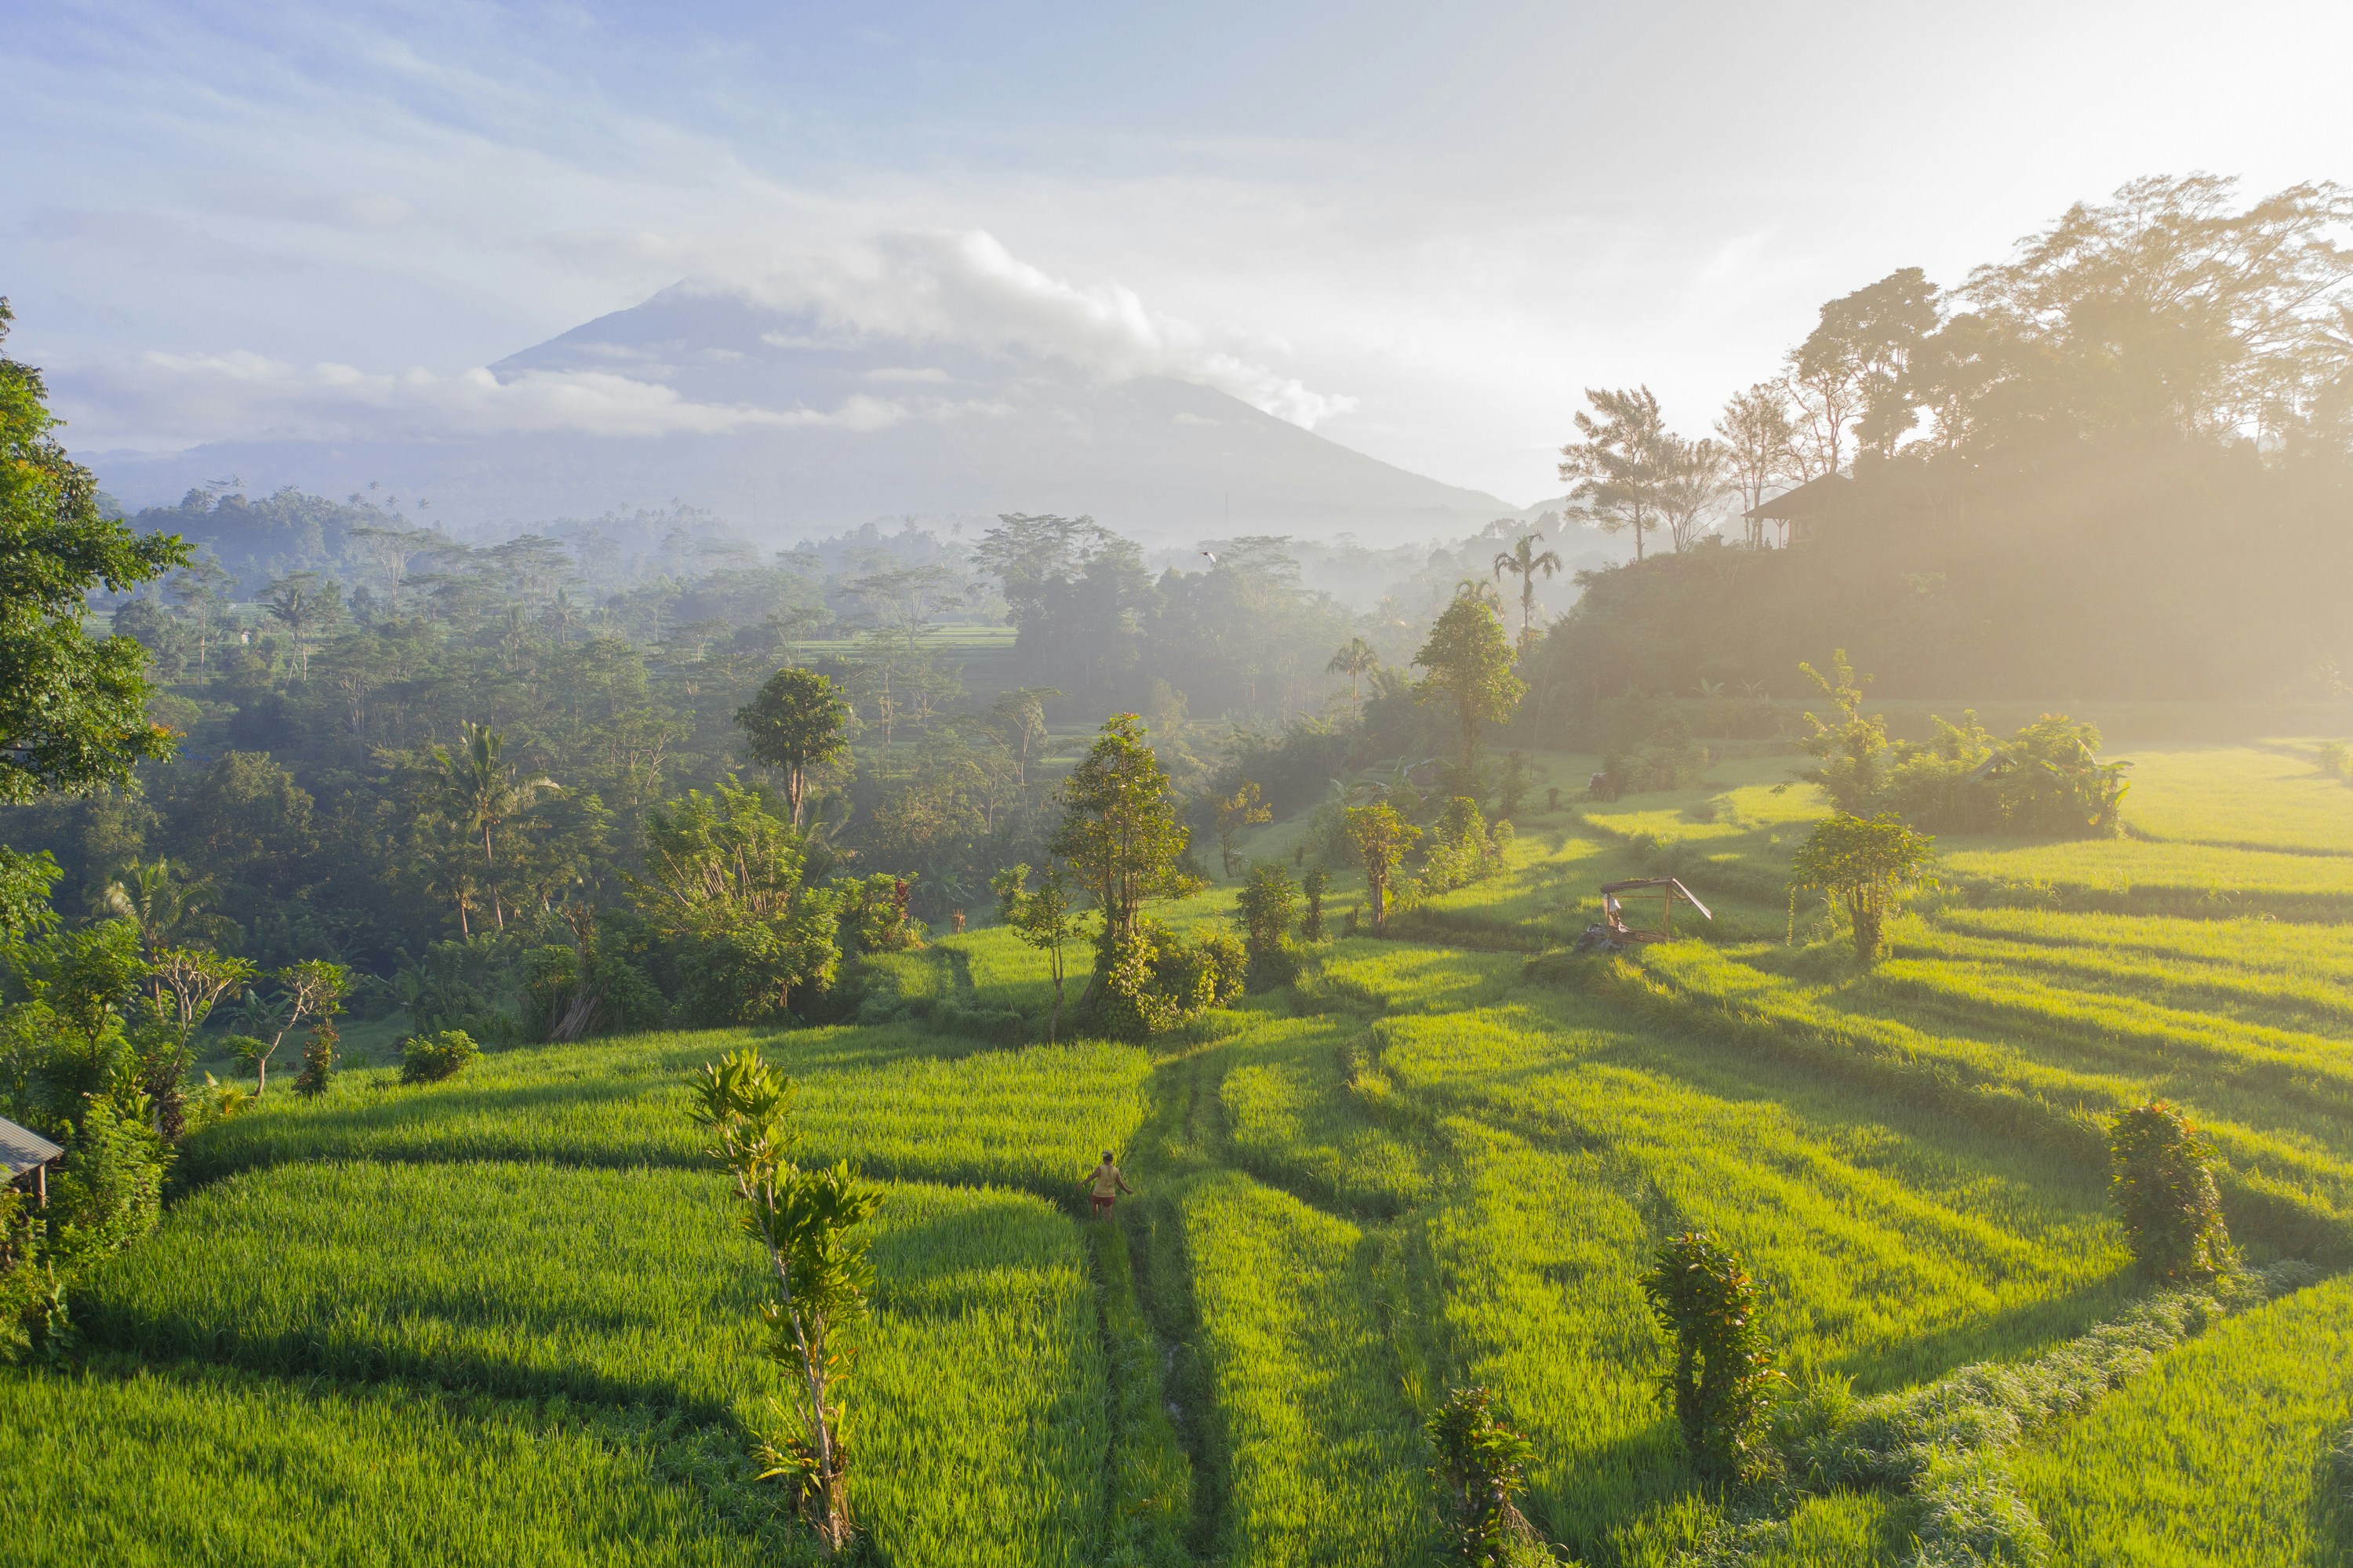 Moving to Bali: Everything You Need to Know